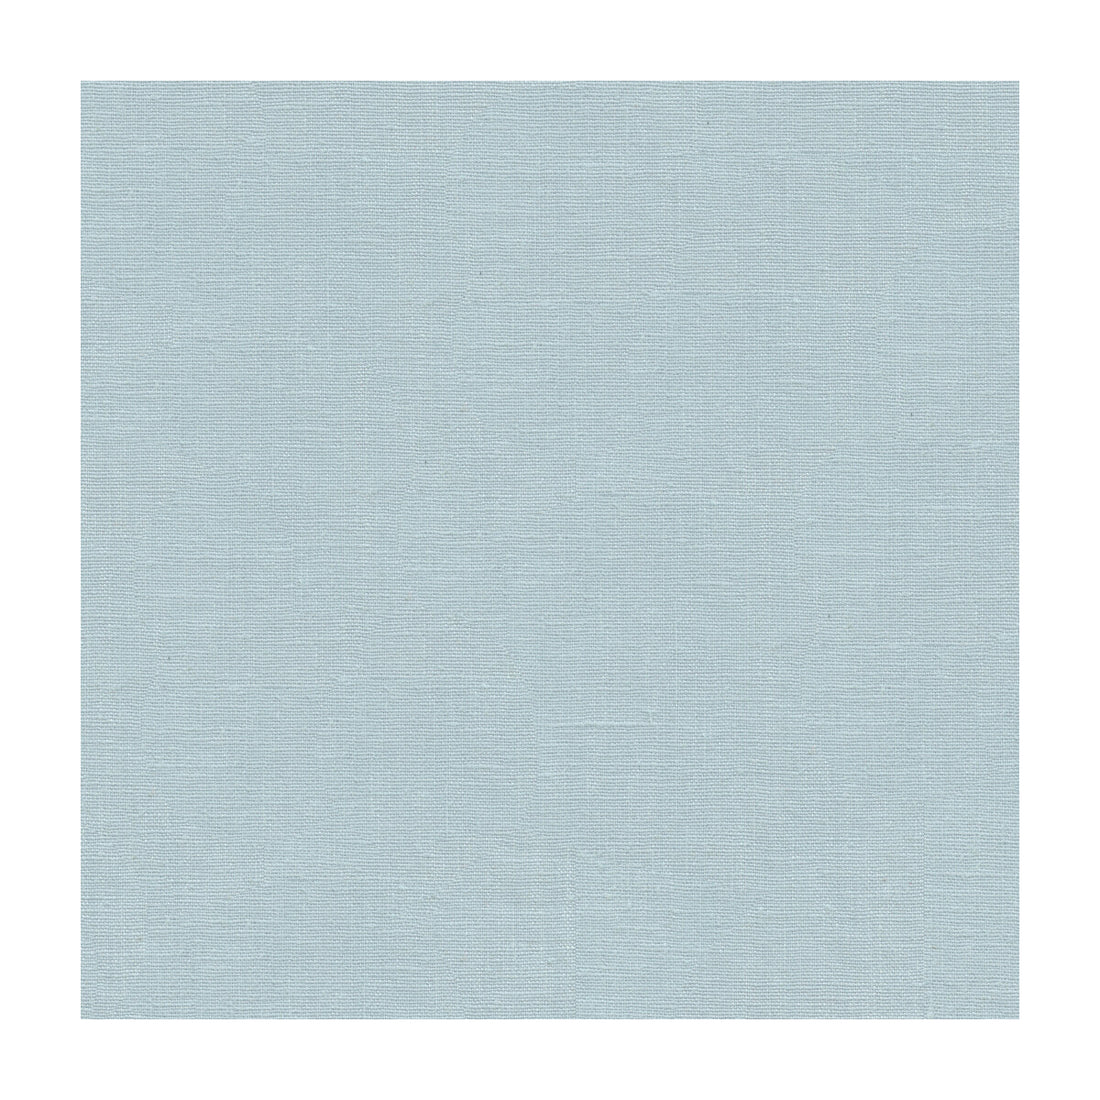 Dublin Linen fabric in sky color - pattern 2012175.1115.0 - by Lee Jofa in the Colour Complements II collection